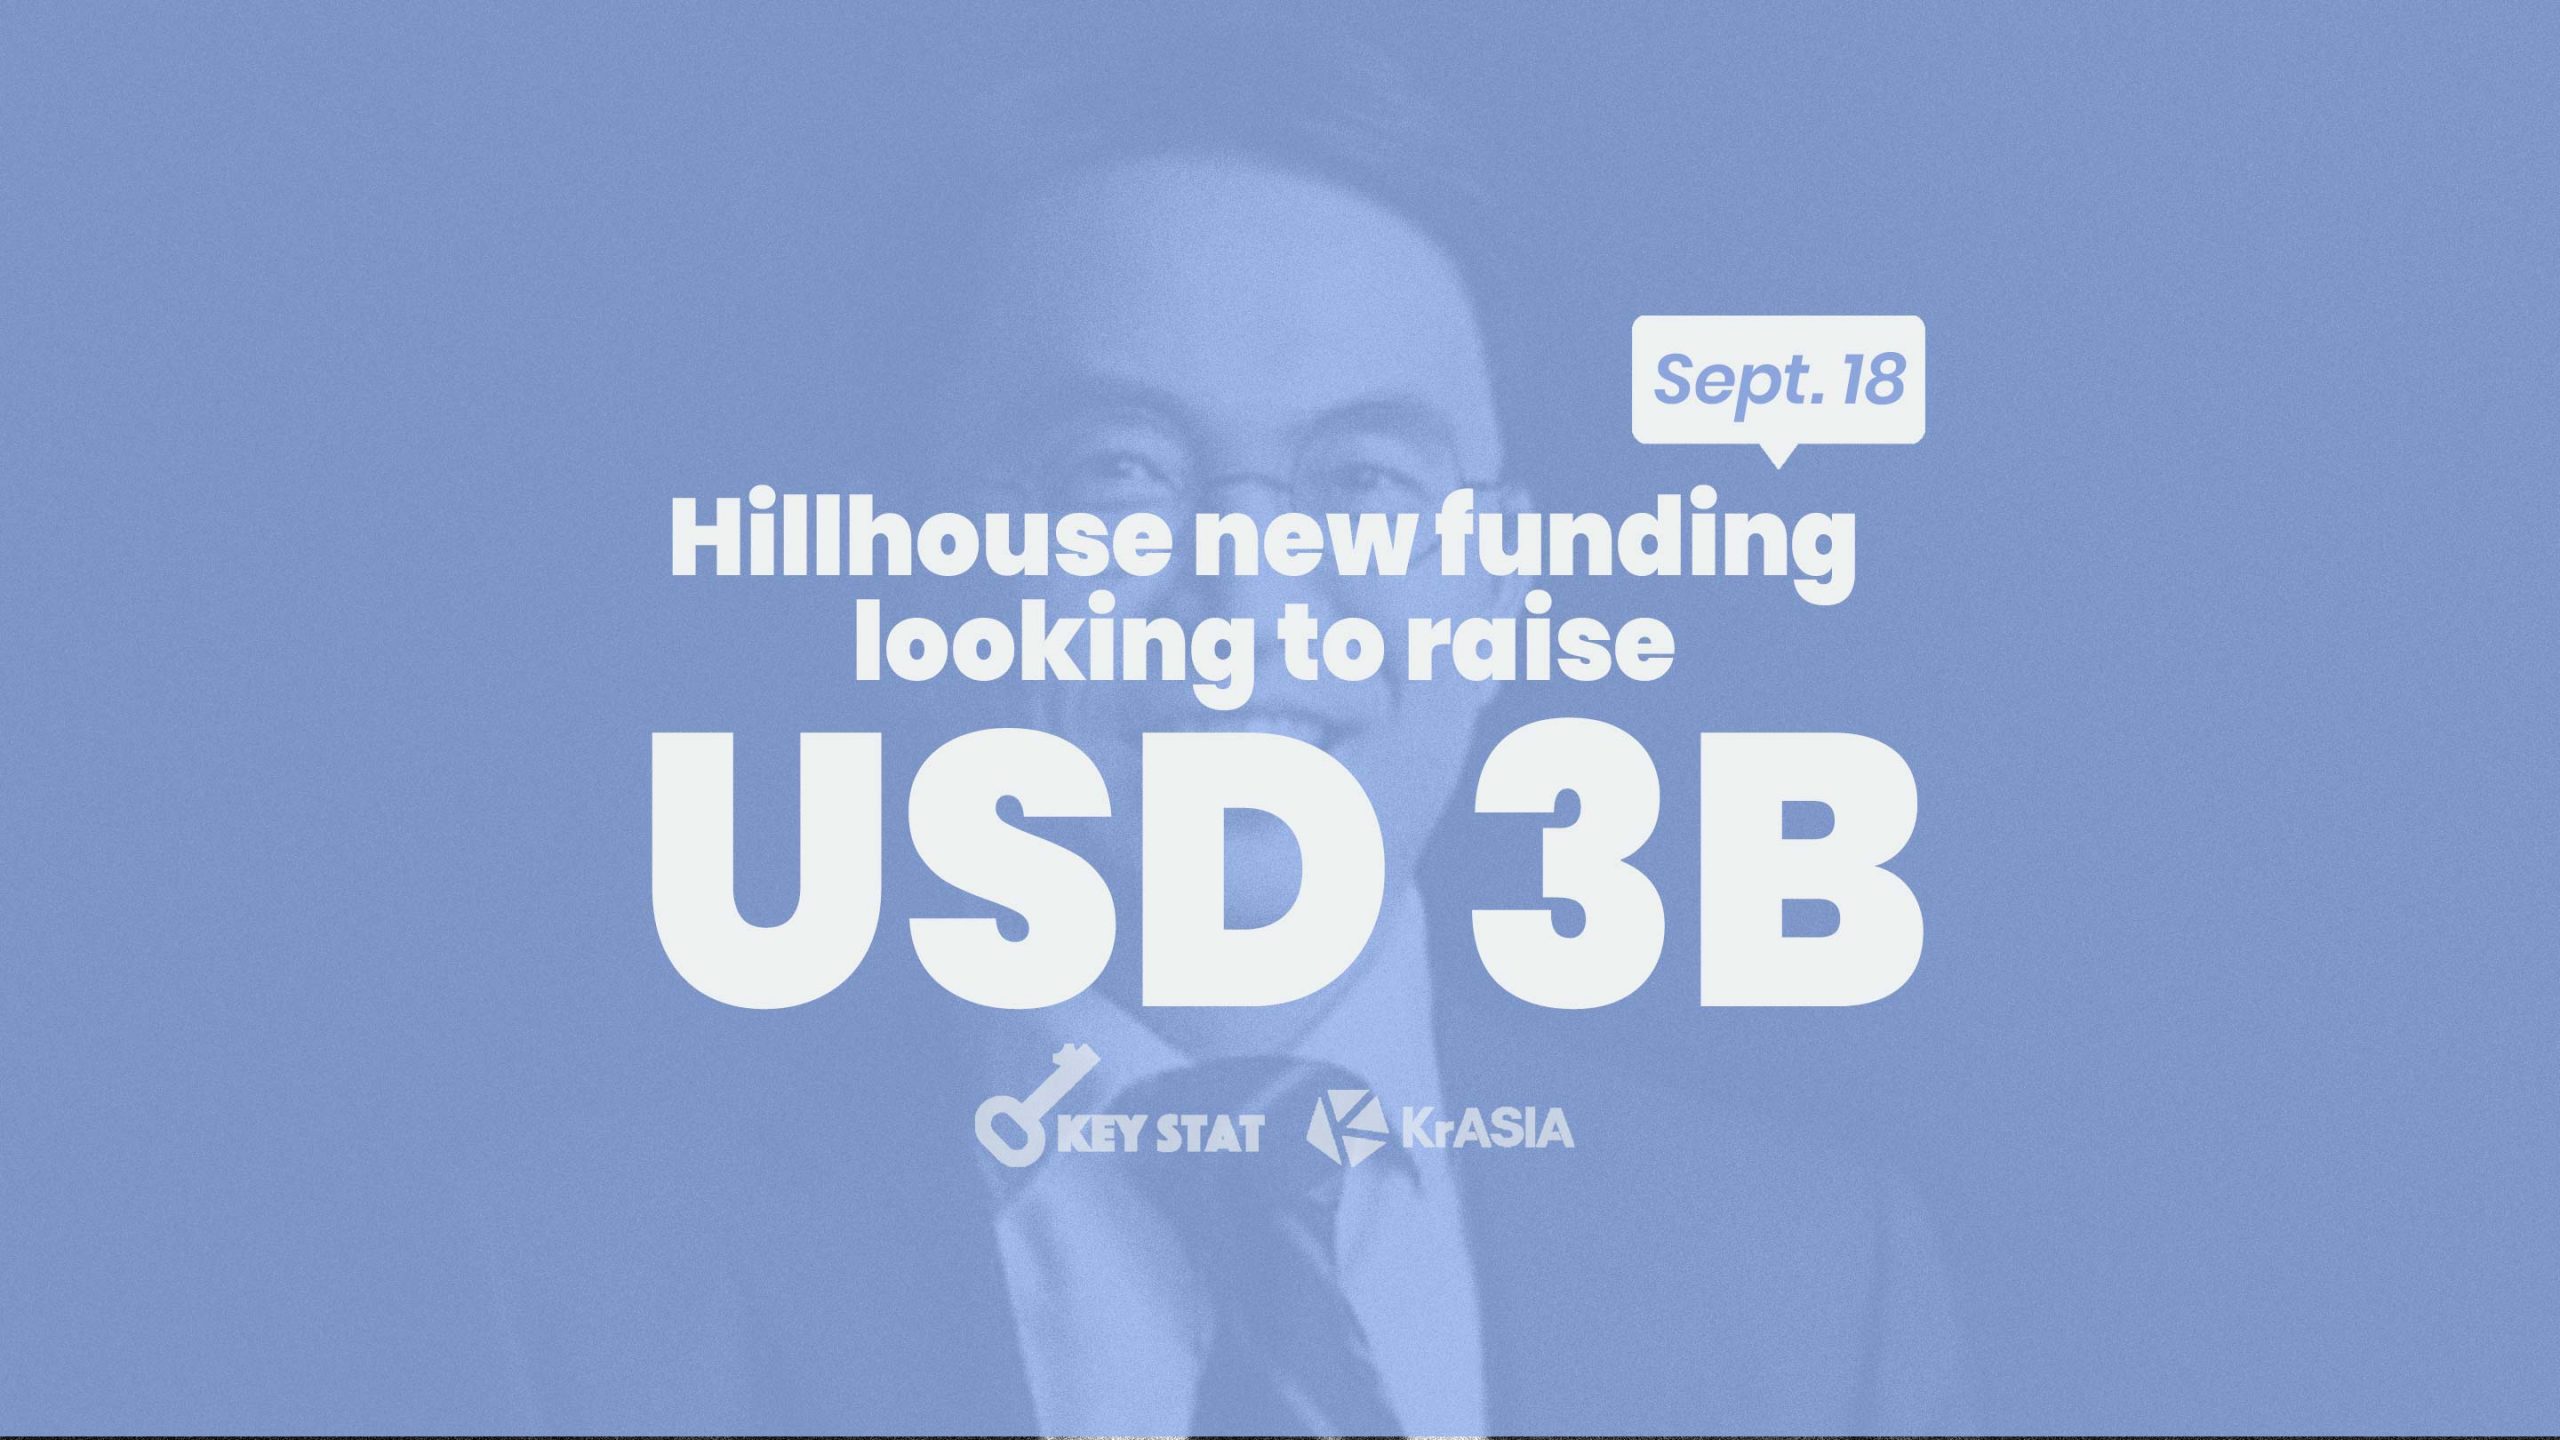 KEY STAT | Hillhouse Capital raises money for its largest-ever RMB fund